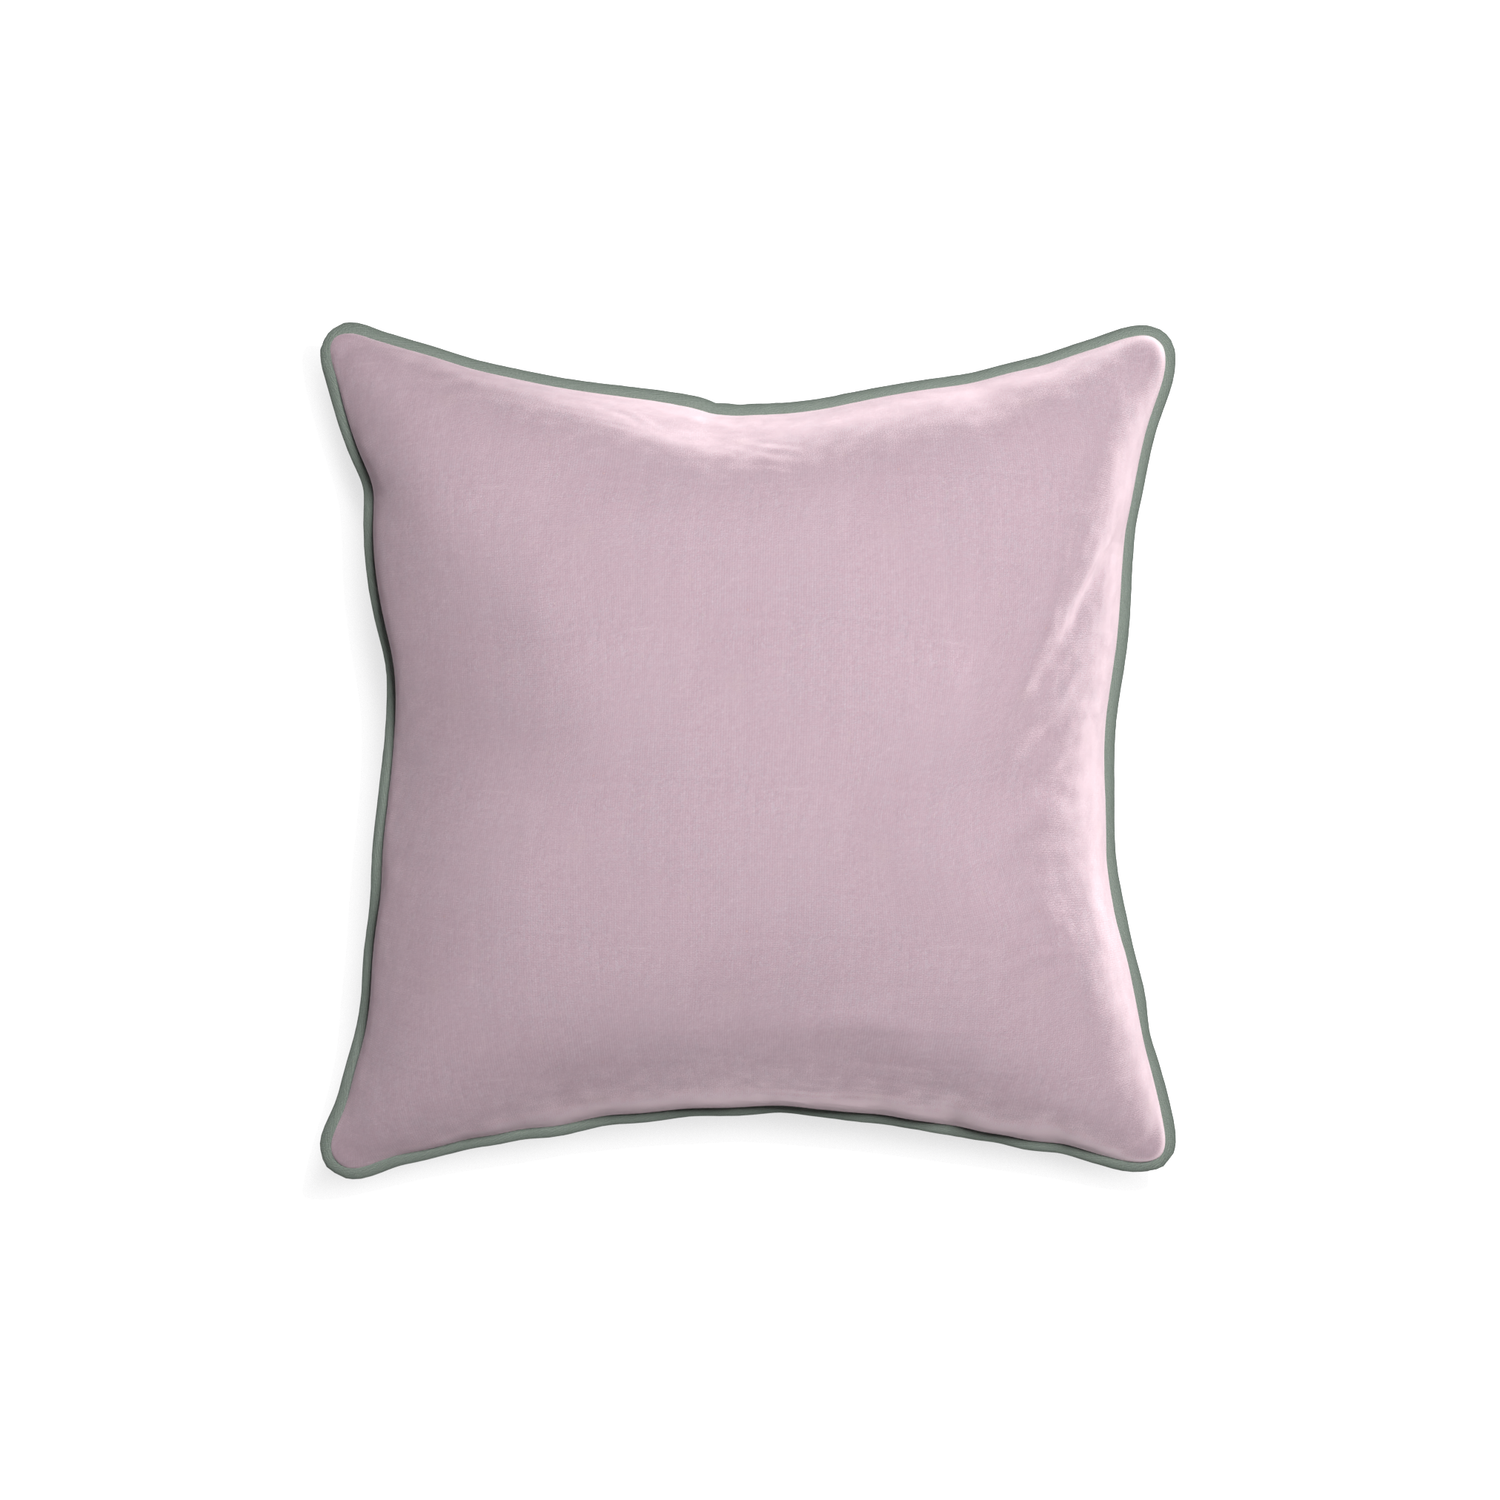 18-square lilac velvet custom lilacpillow with sage piping on white background